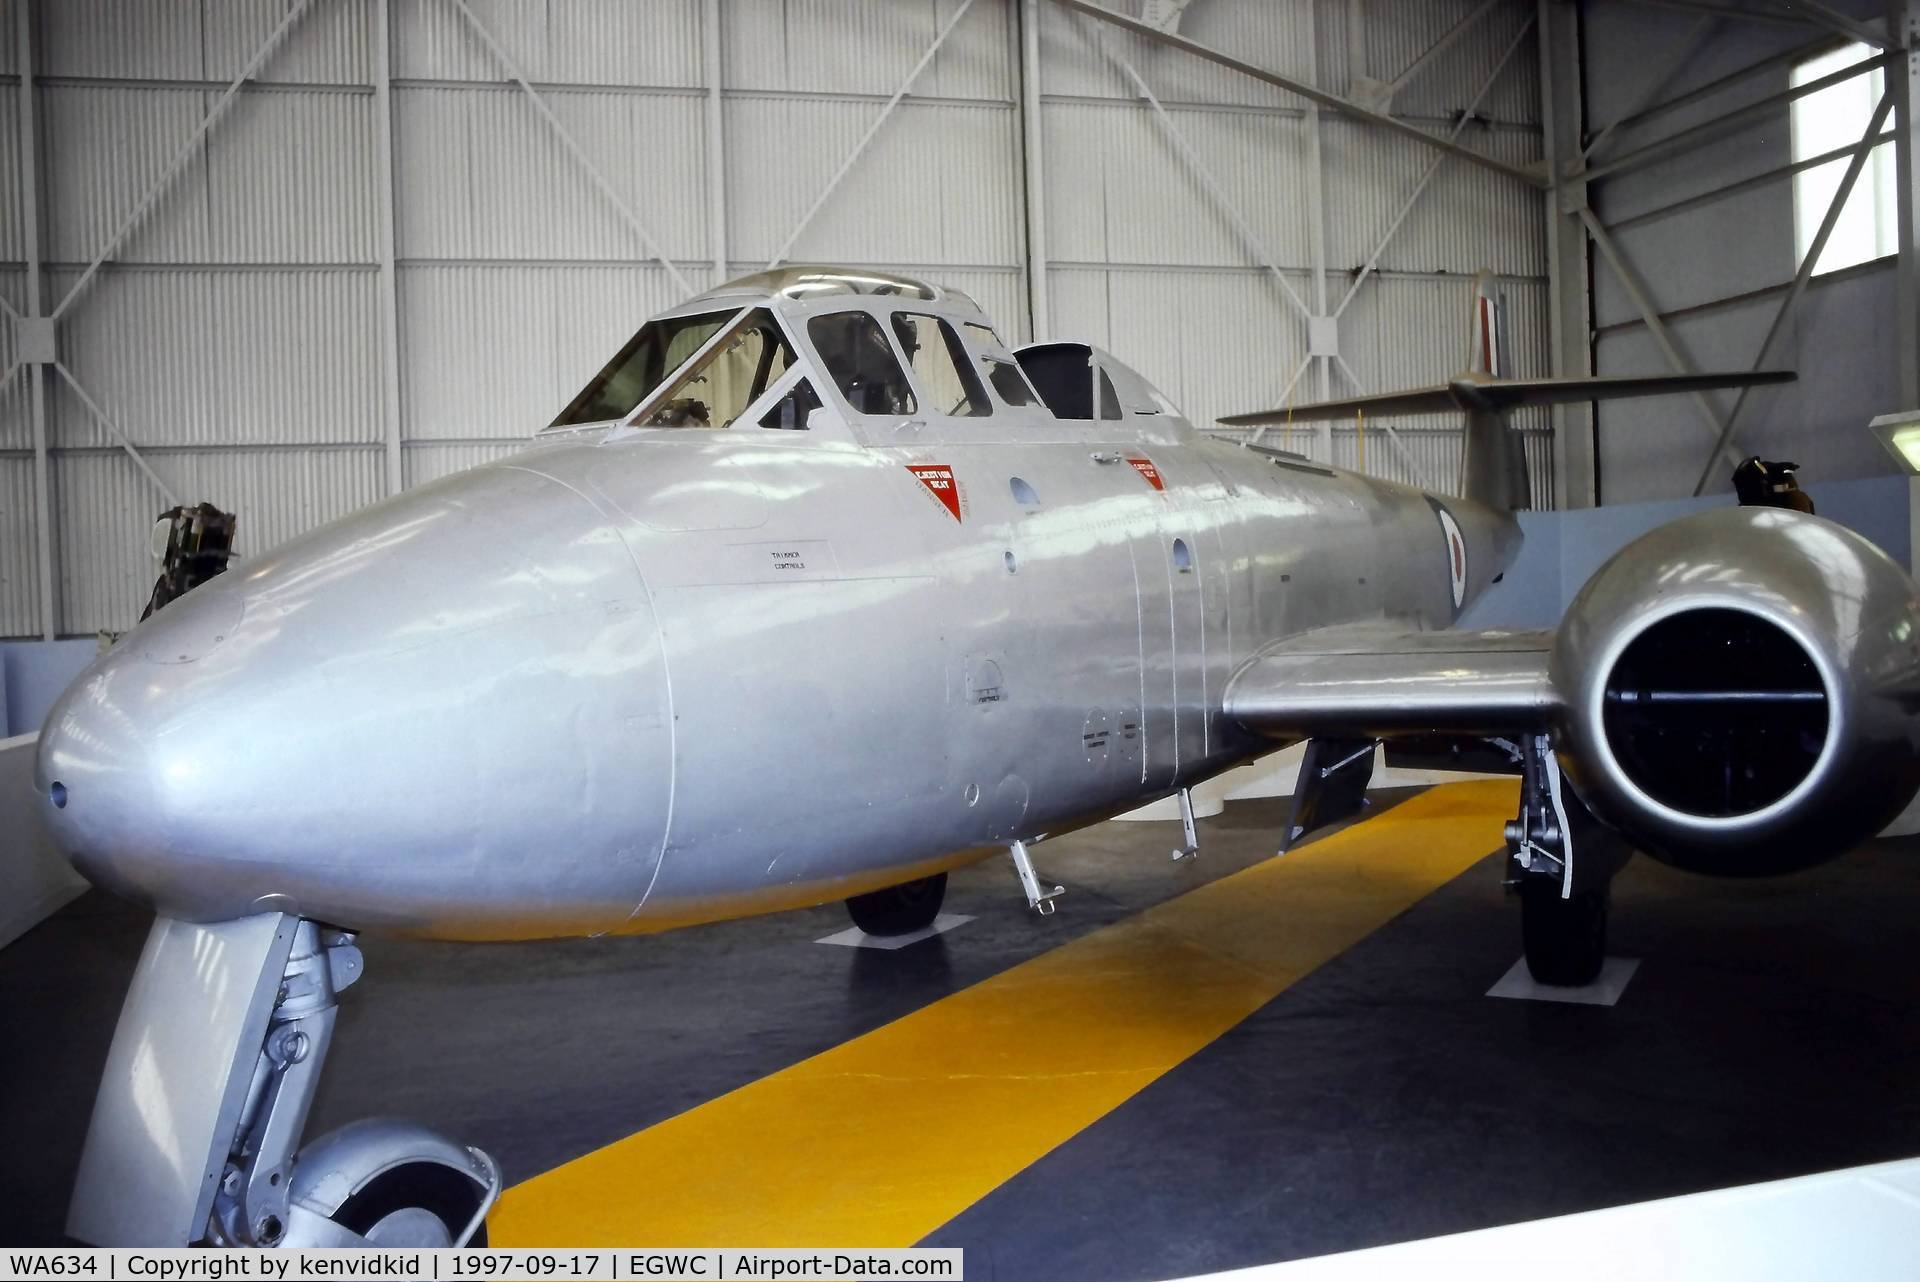 WA634, Gloster Meteor T.7 C/N Not found WA634, A visit to Cosford in 1997.